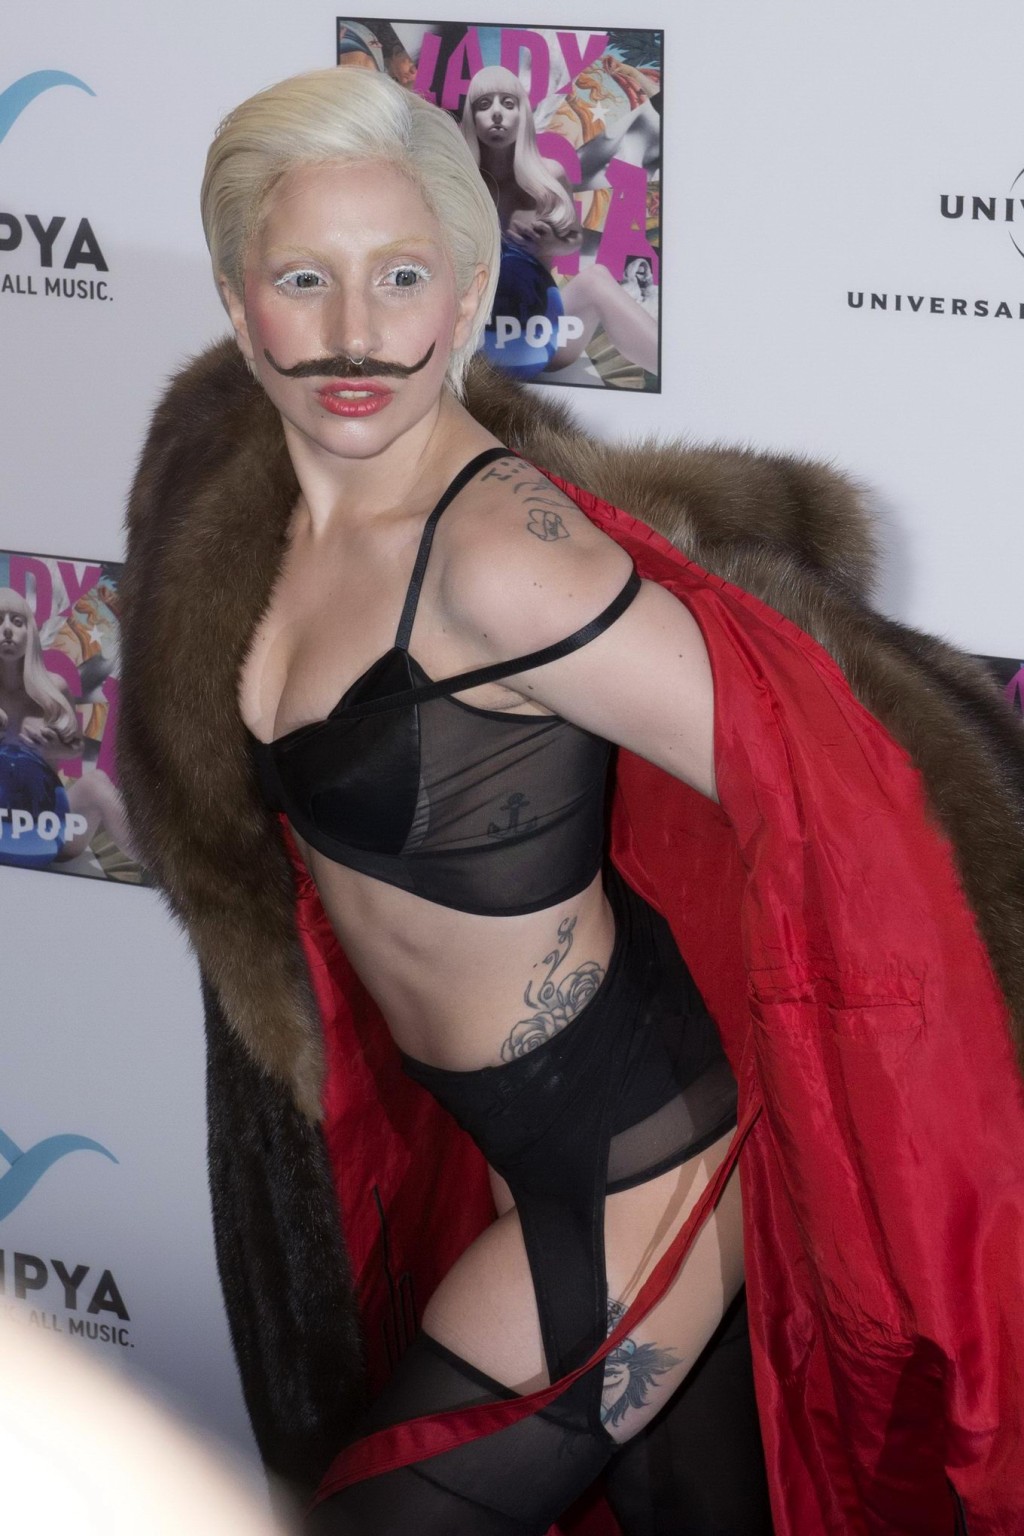 Lady Gaga wearing lingerie and fake moustache at her album promotion in Berlin #75215013